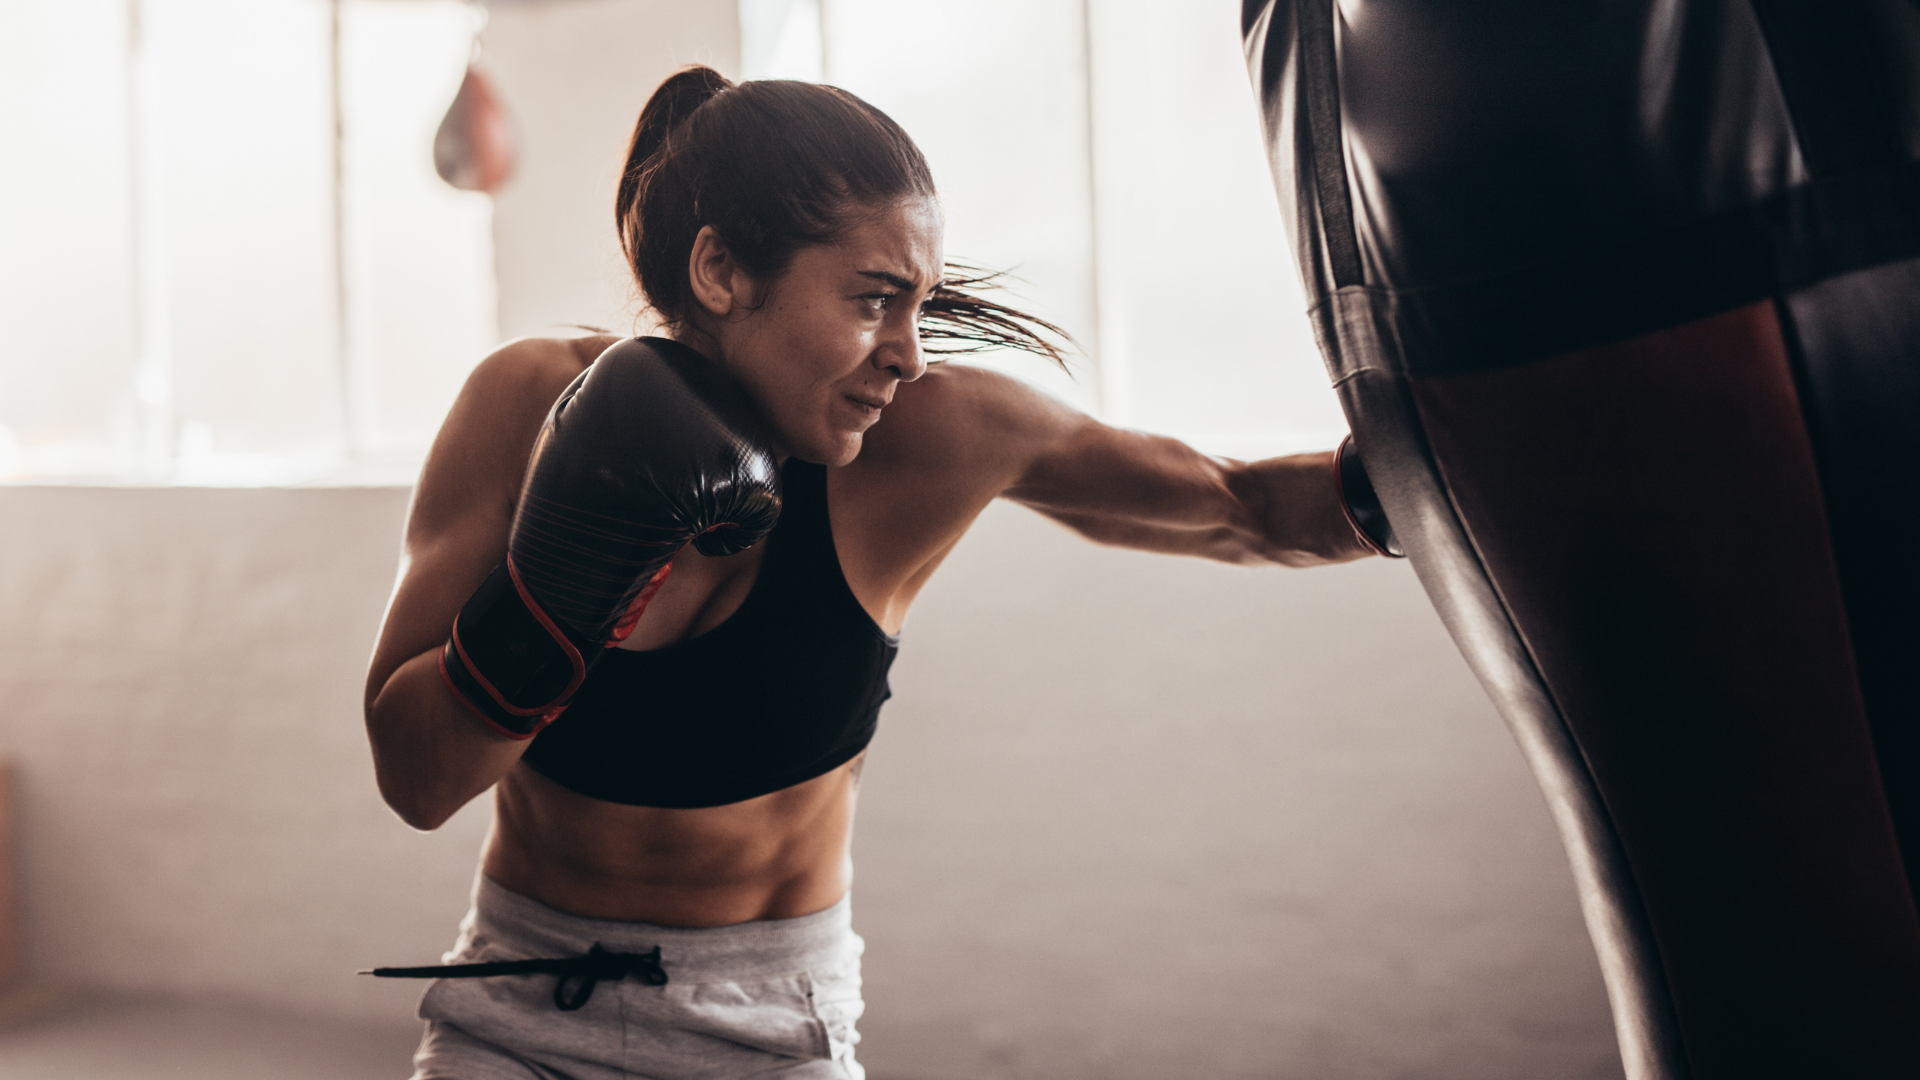 Use a punching bag for an intense workout